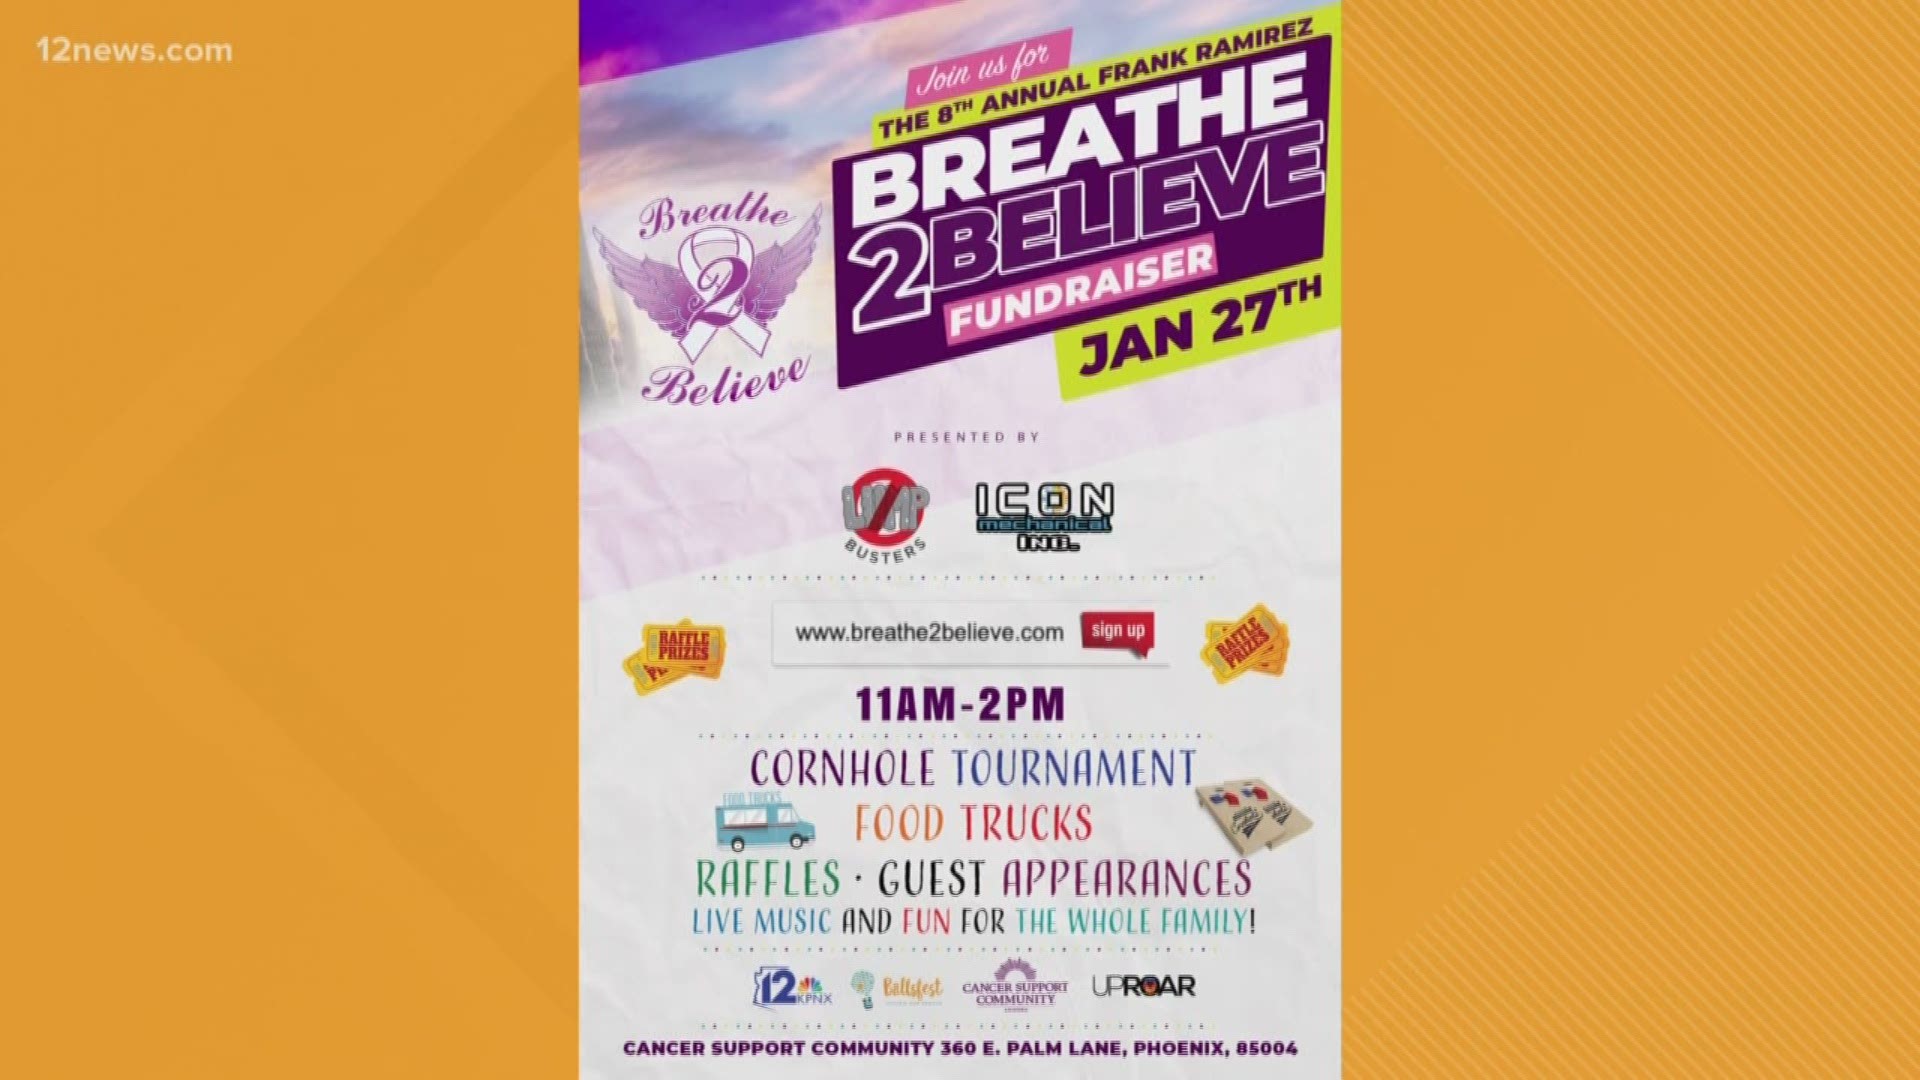 Join the 12 News team honoring the life of Frank Ramirez and supporting Arizona's cancer community with food, kid-friendly games, giveaways and much more. Get your tickets for the event or make a donation at www.breathe2believe.com